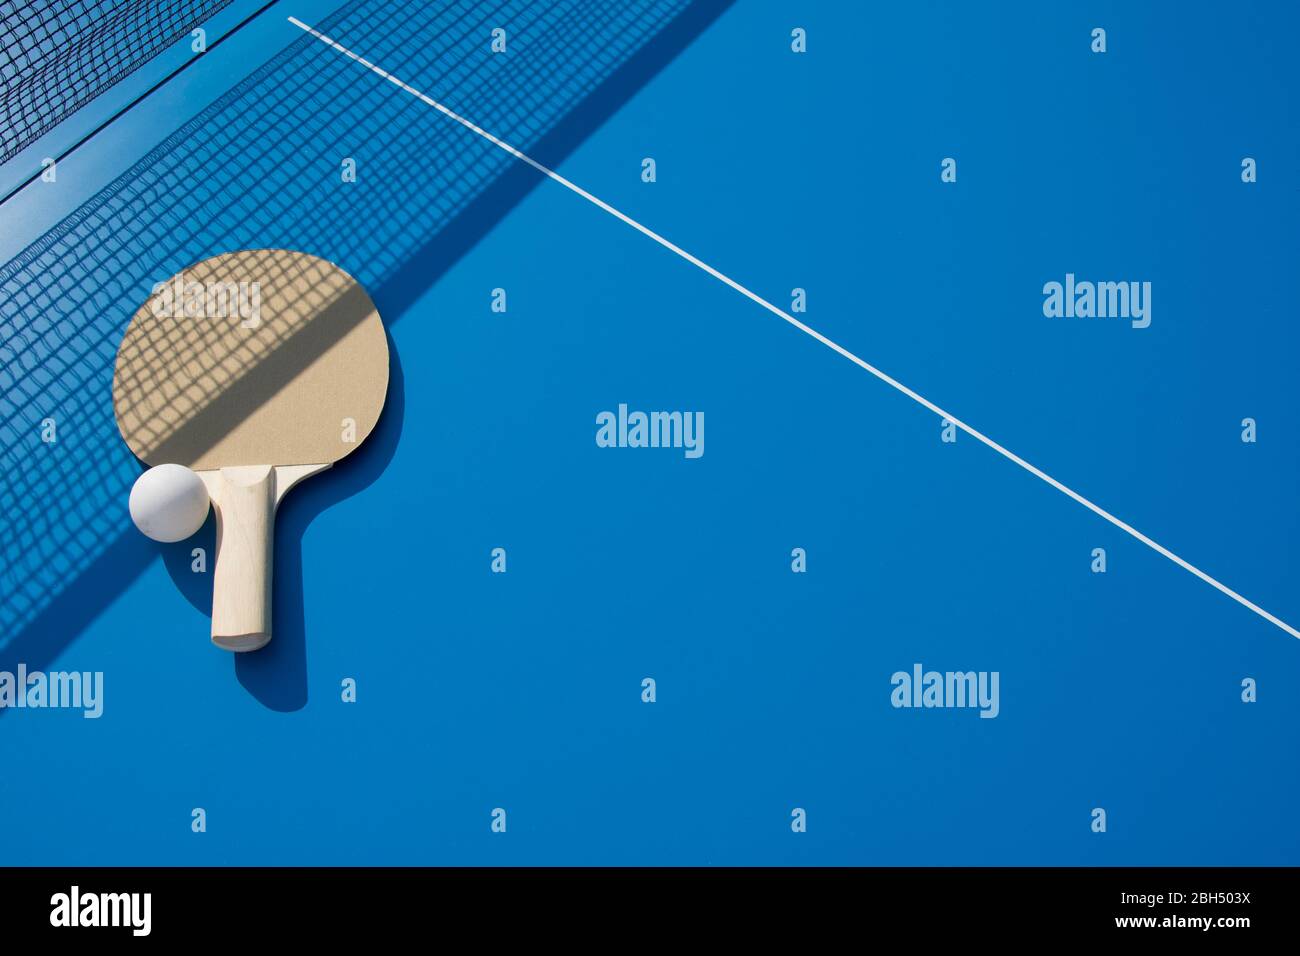 Table tennis paddle and ball Stock Photo